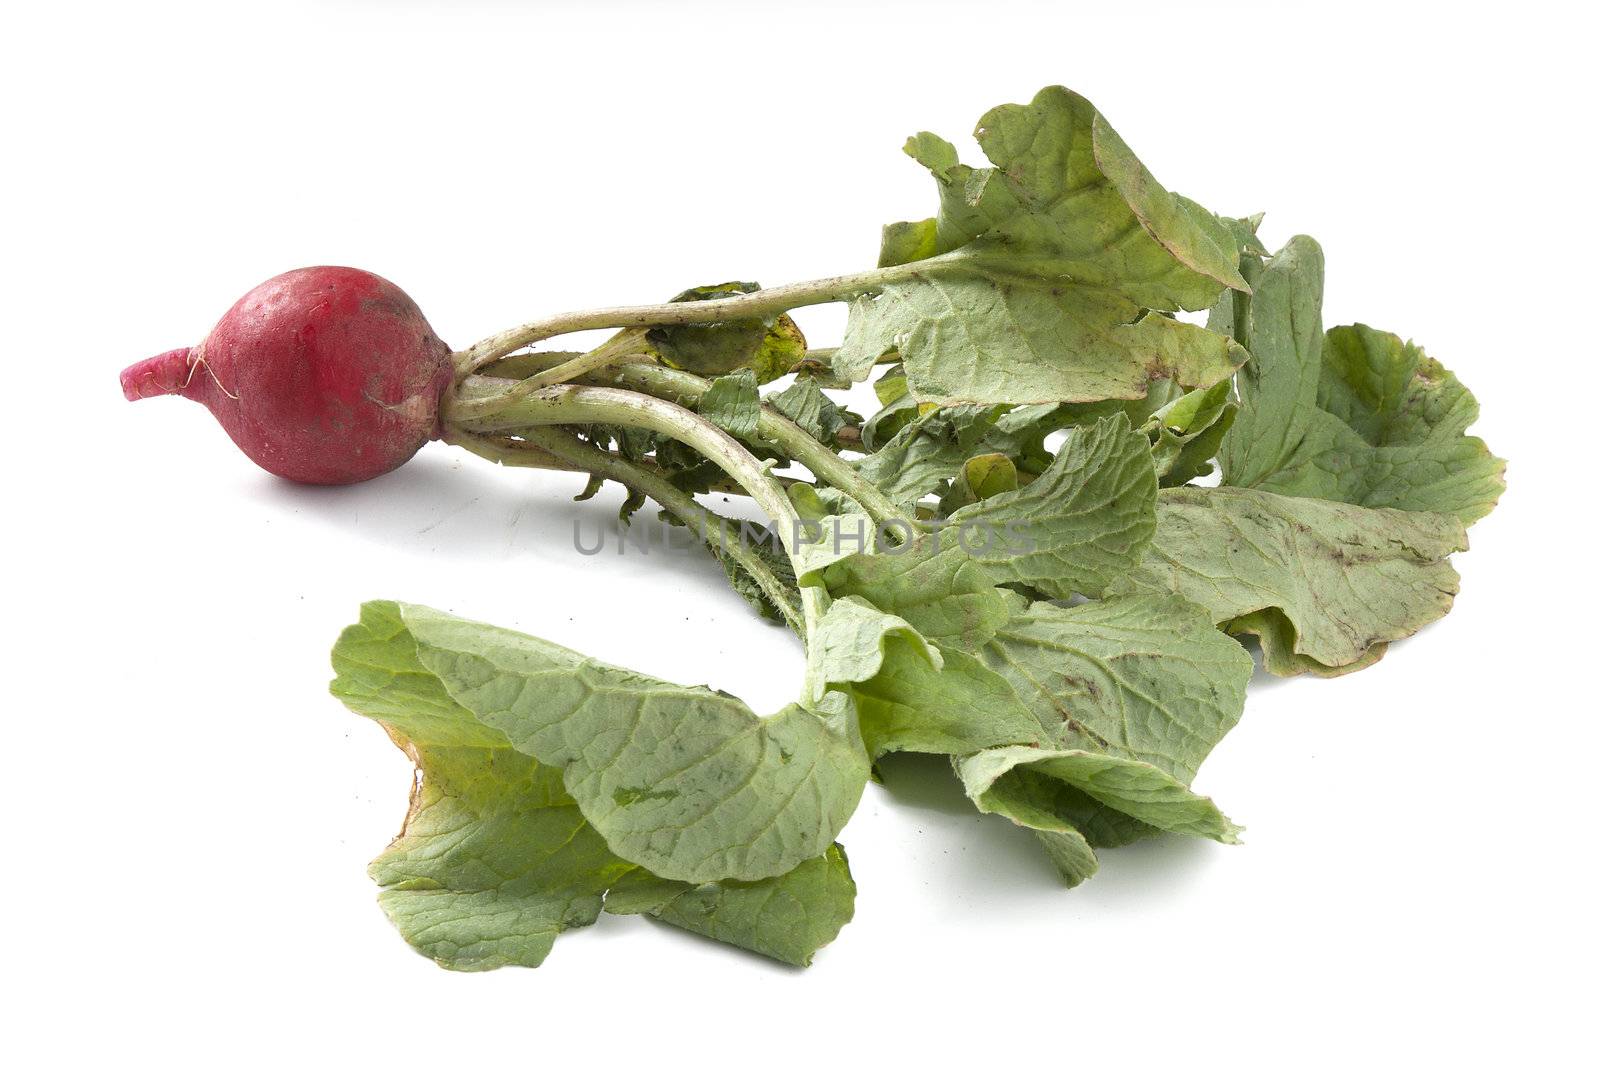 One bunch of radish on the white background